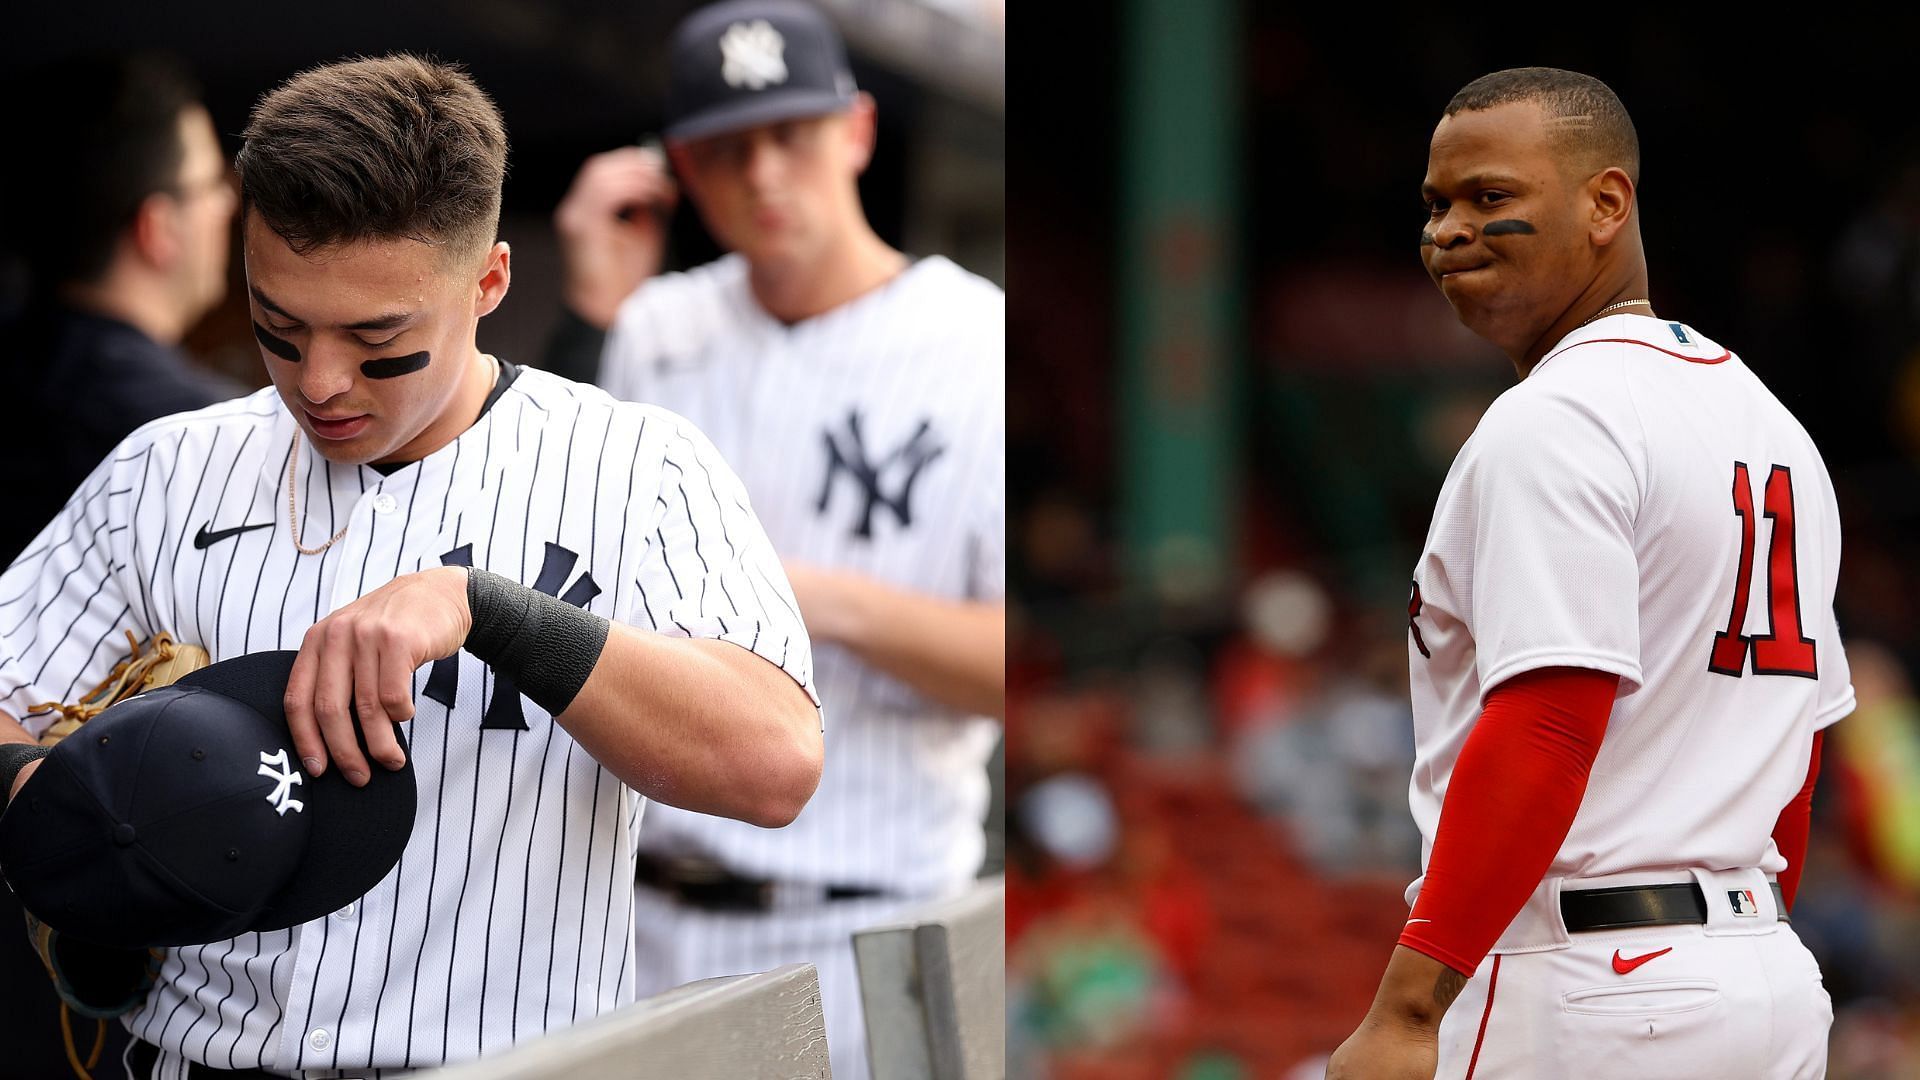 New York Yankees and Red Sox fans cite lack of fan enthusiasm